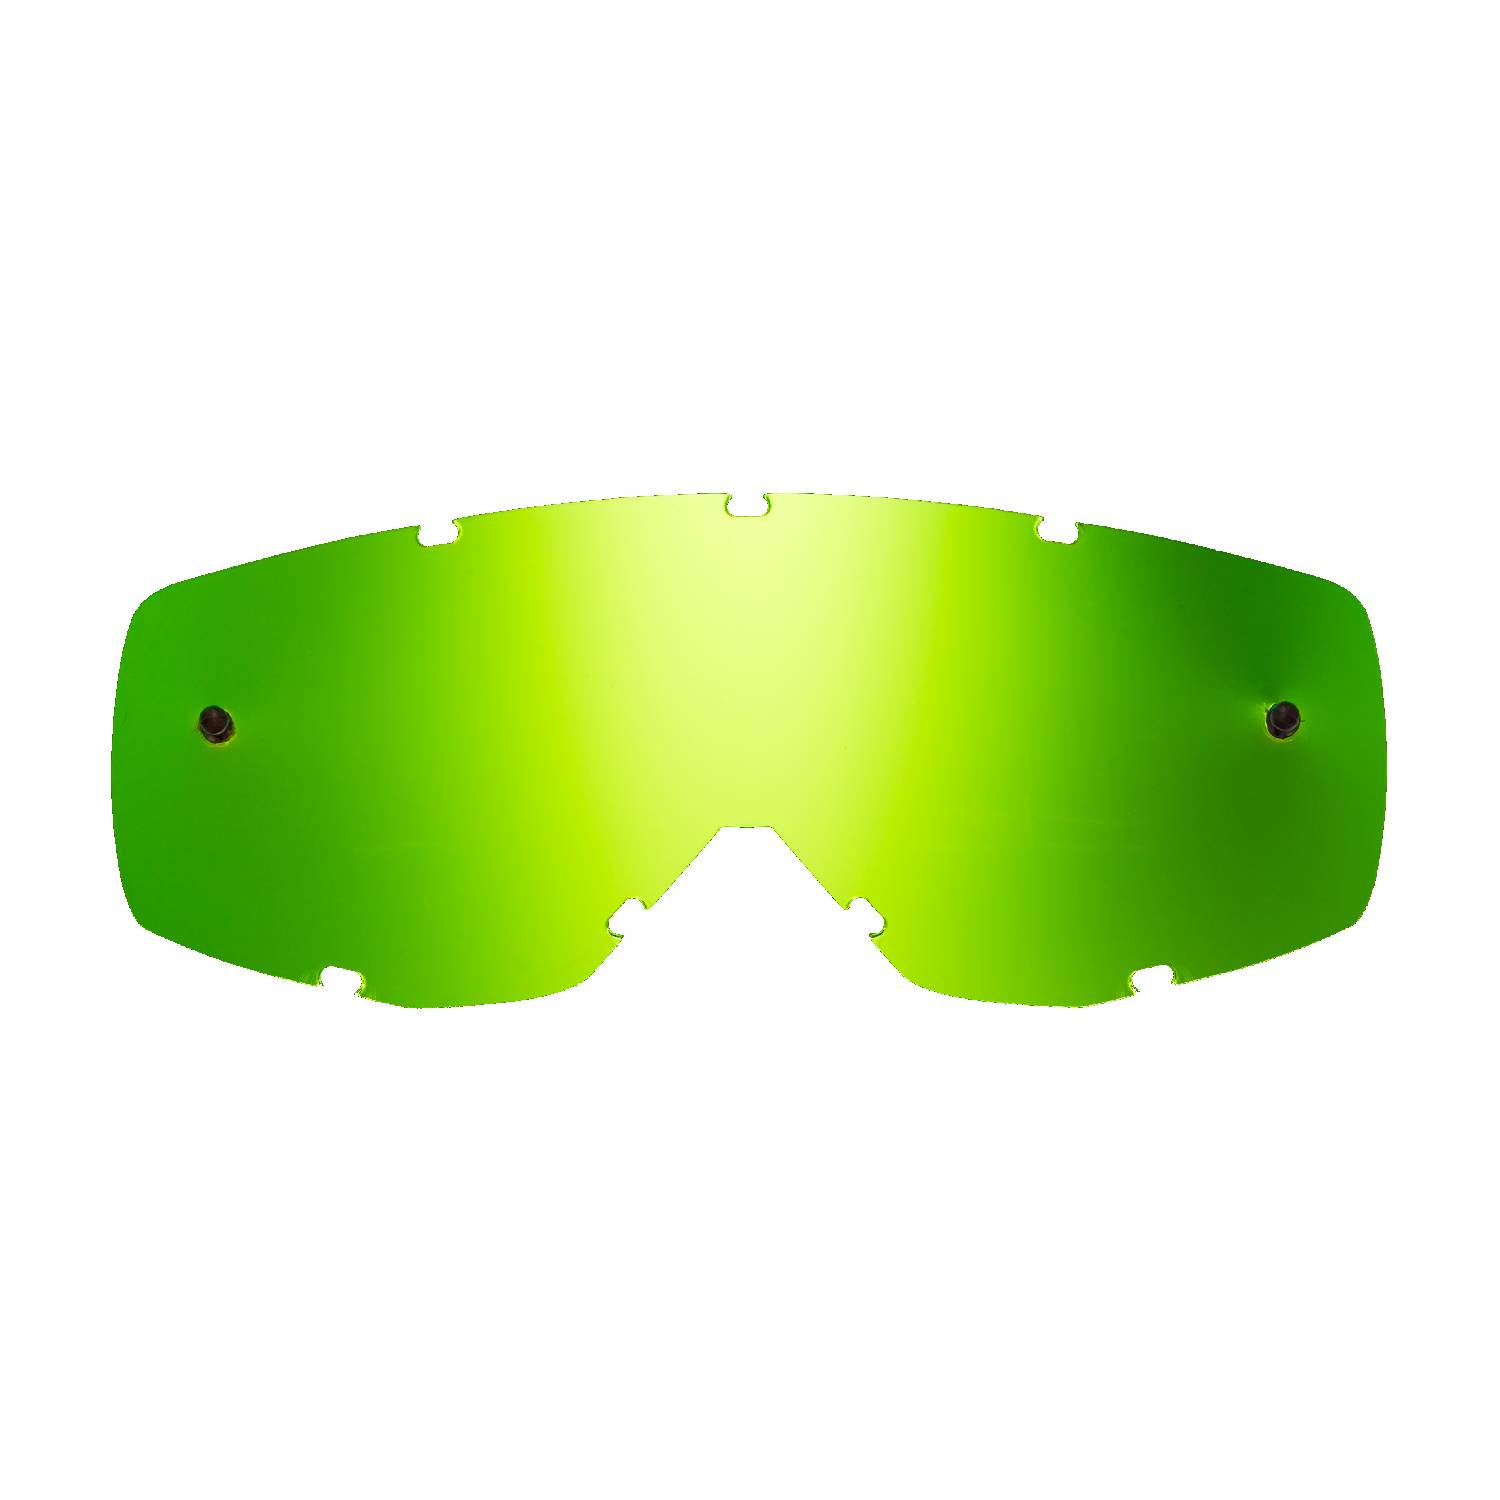 green-toned mirrored replacement lenses for goggles compatible for Scott Hustle/ Primal / Tyrant / Split goggle